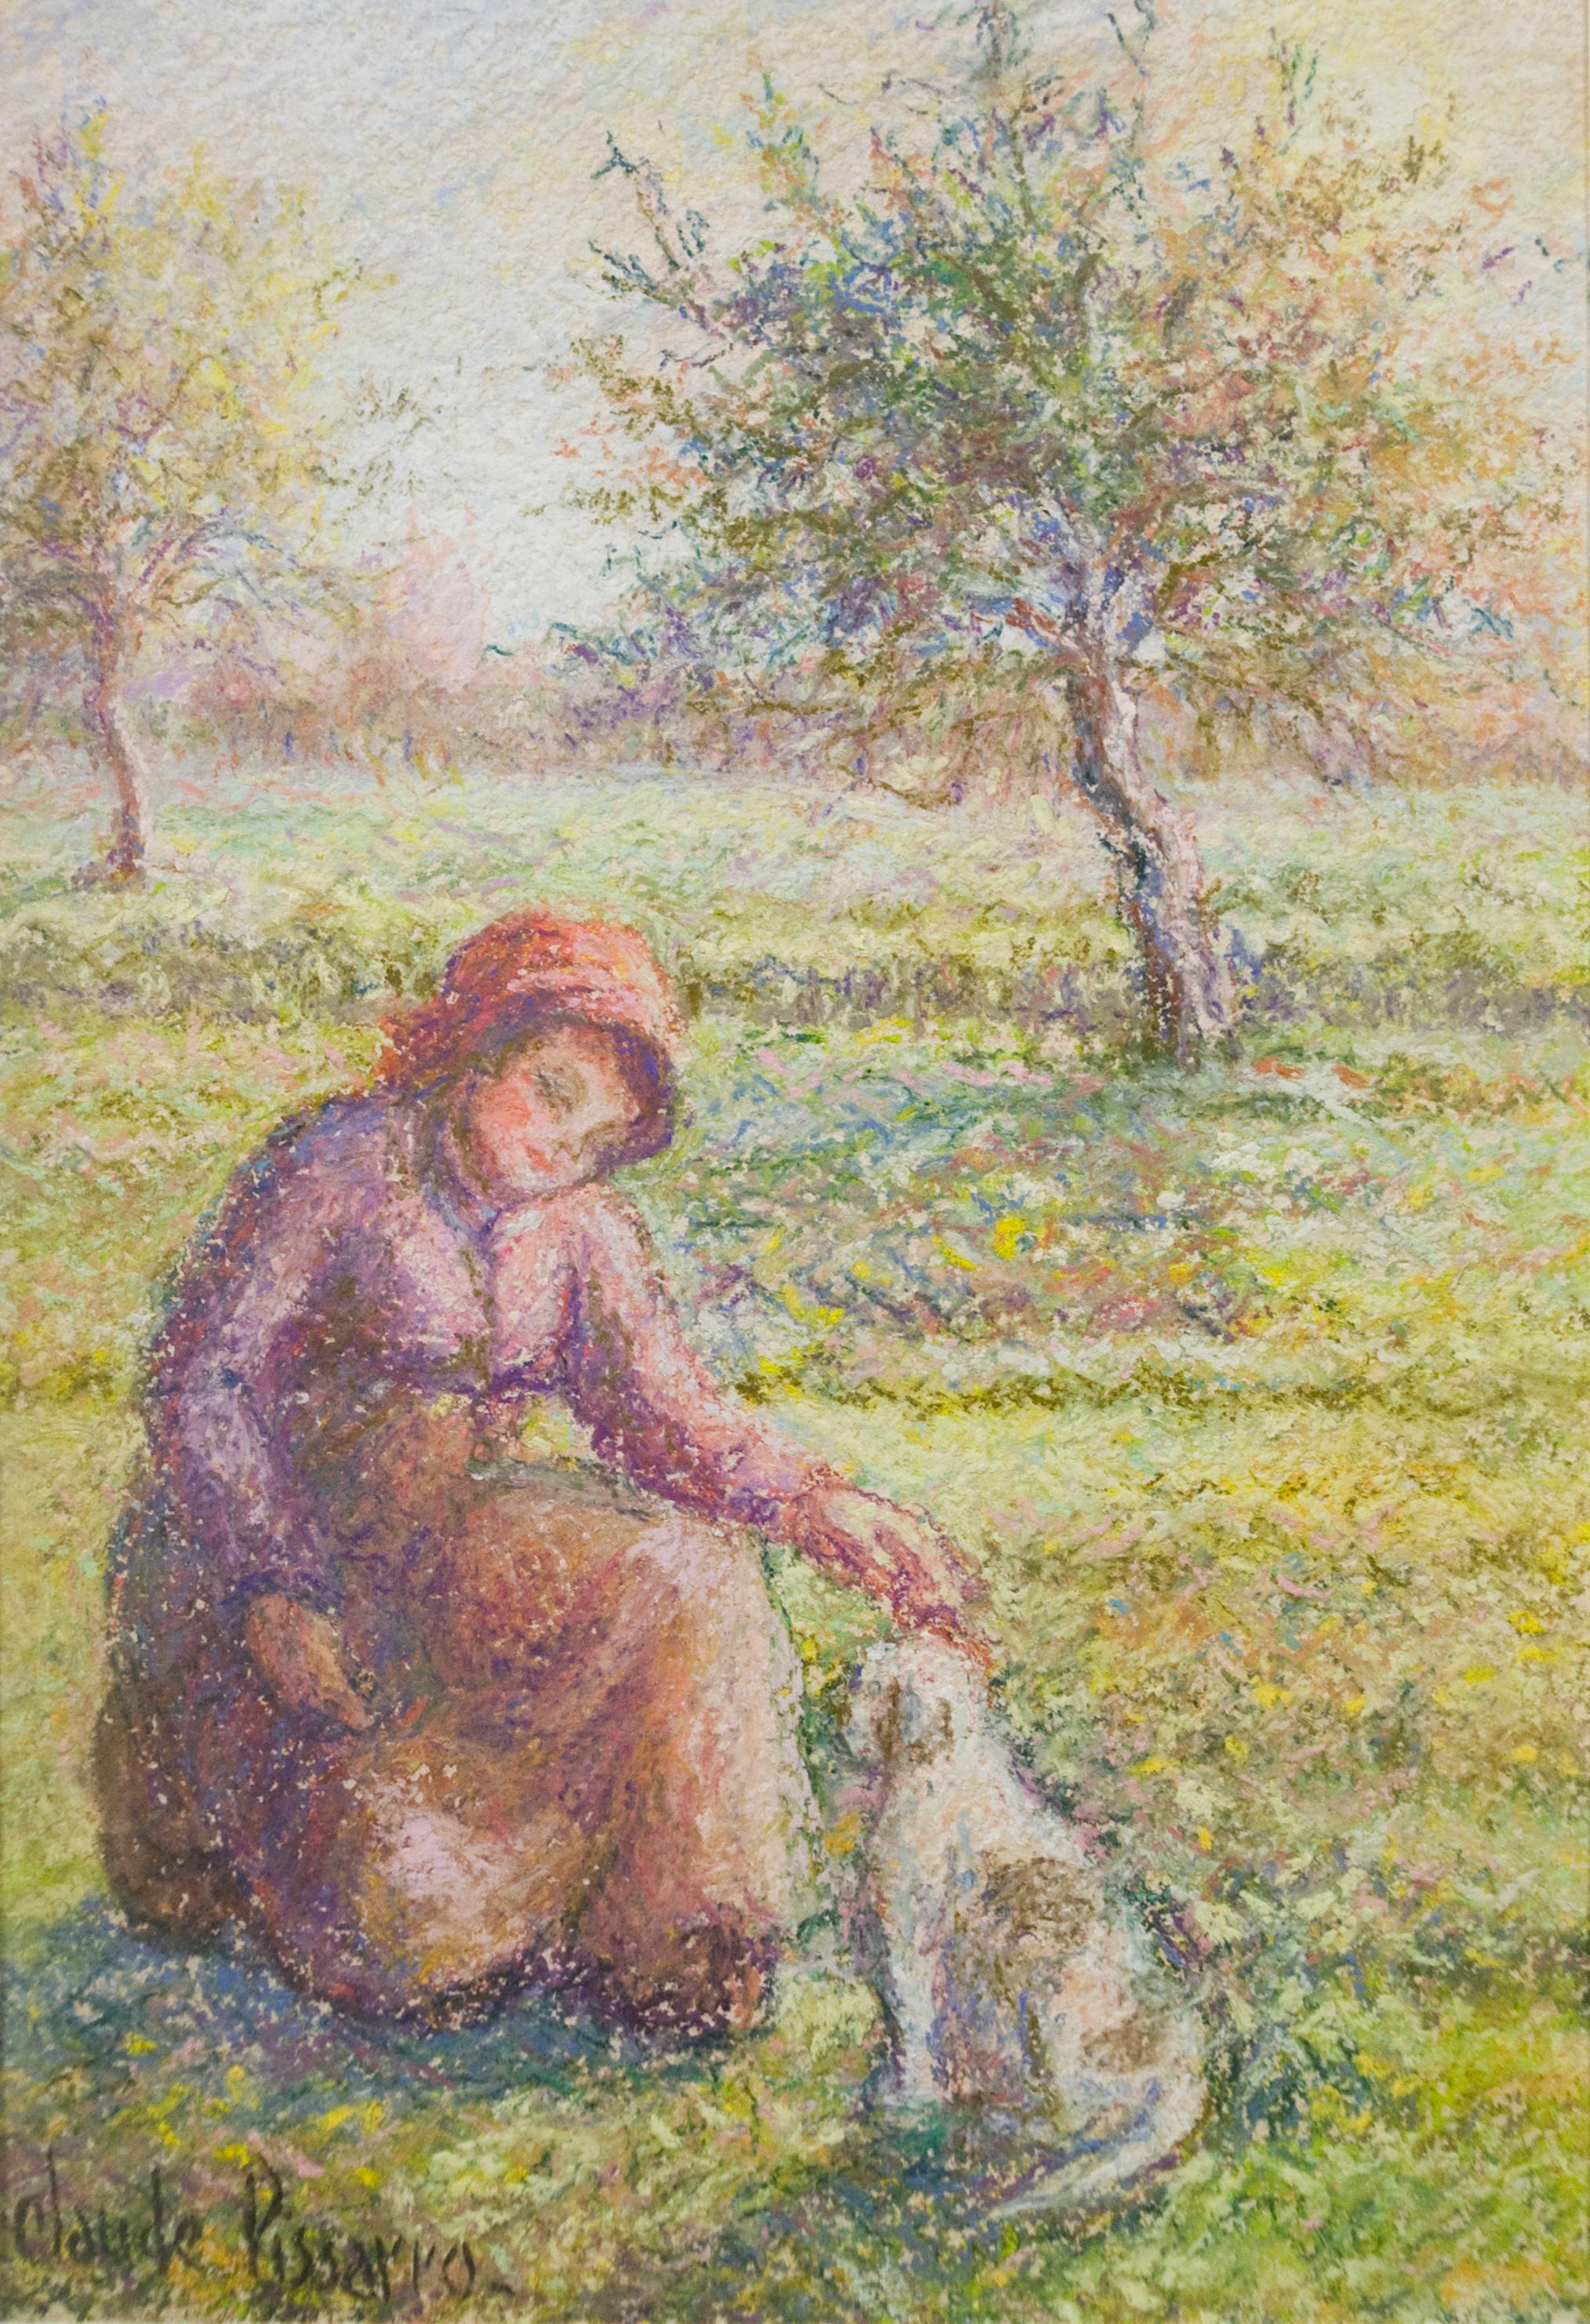 Hughes Claude Pissarro Landscape Art - French Impressionist Landscape by H.C. Pissarro, titled "A Girl and her Dog"